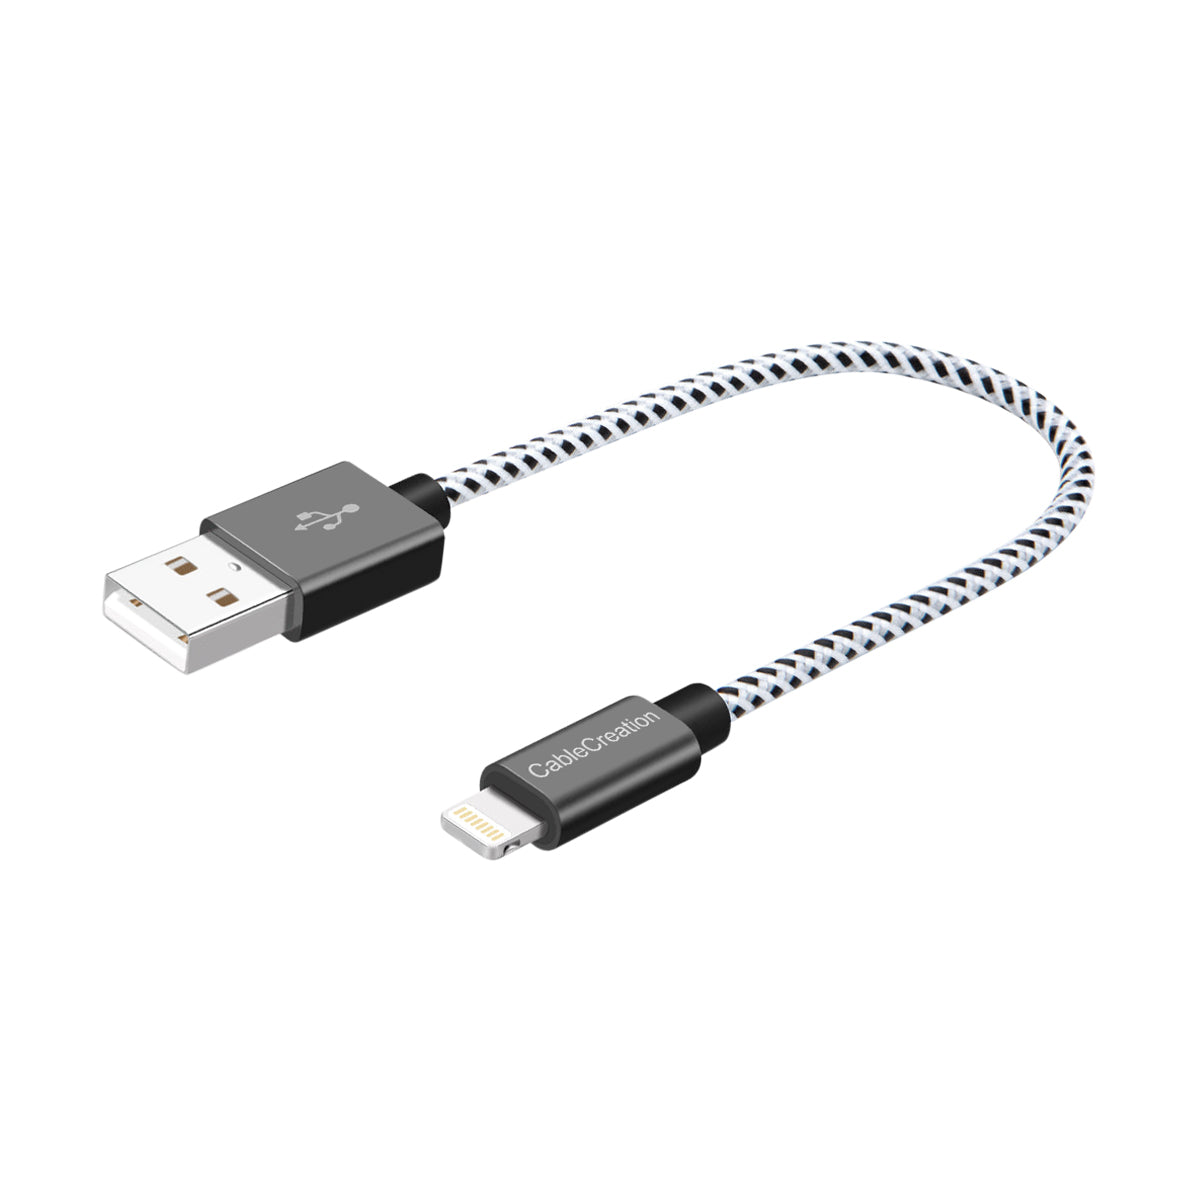 Cable 15cm Lightning a USB de iPhone - Cables Lightning